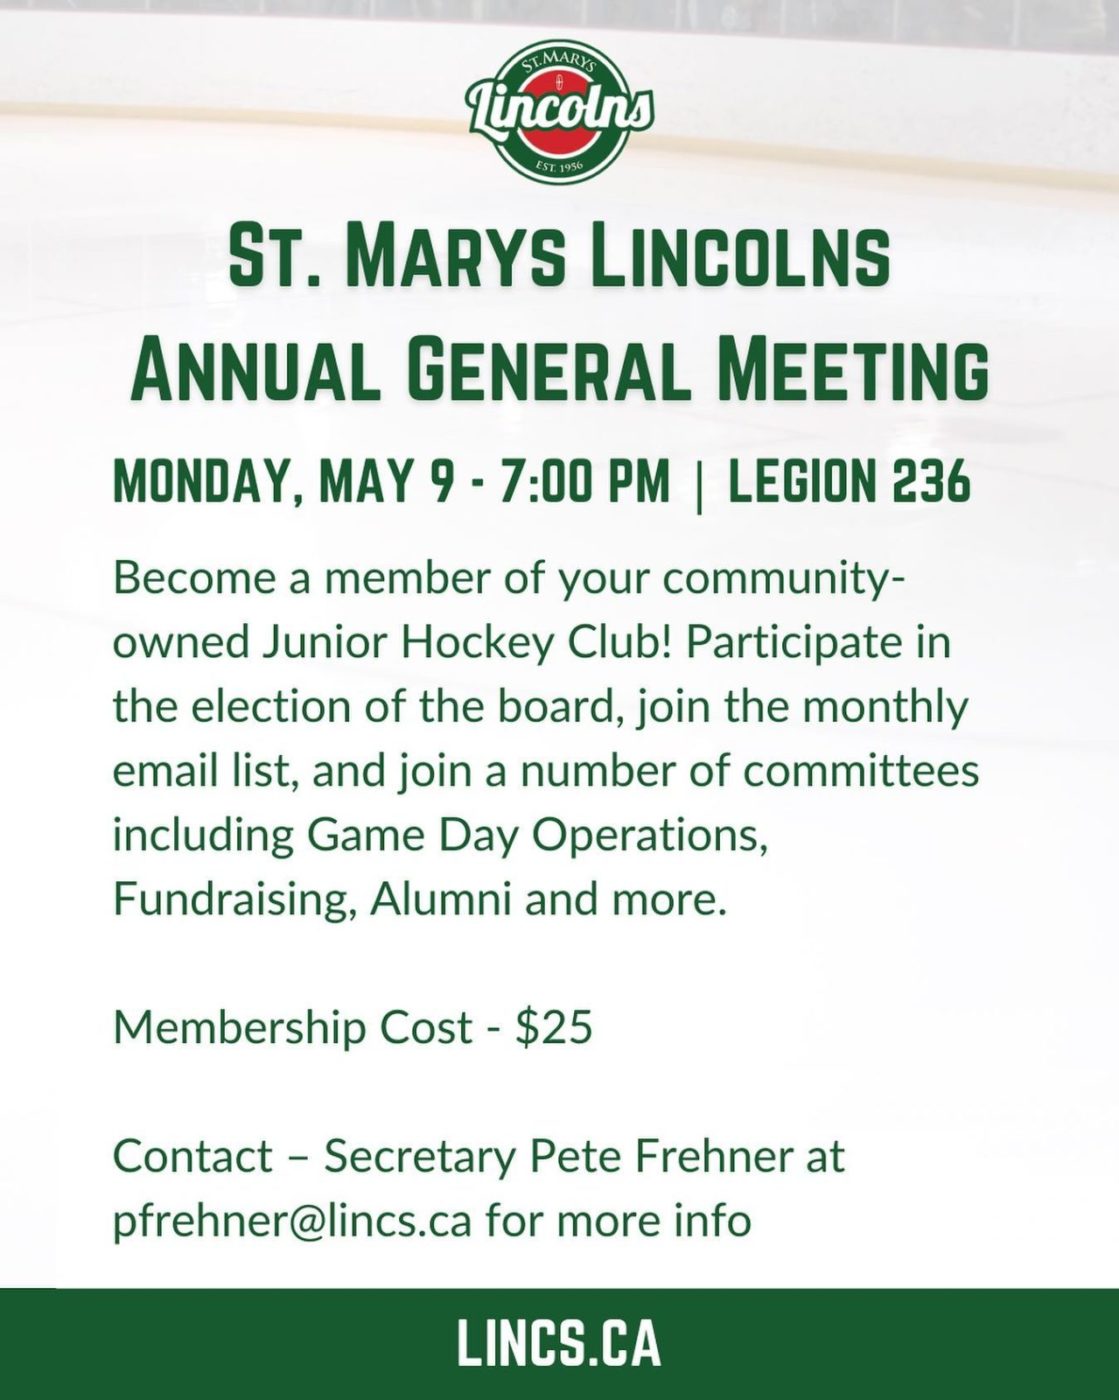 Get involved with your community-owned St. Marys Lincolns! Become a member and attend our AGM on May 9th.  Have your say in the operation of the team by becoming a member. Email Lincs Executive Pete Frehner for more info or to signup today #WeAreLincolns